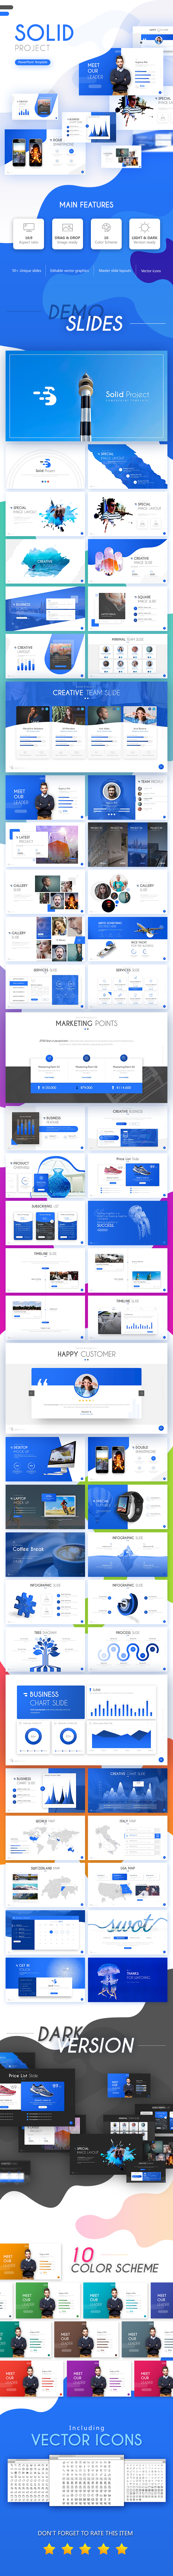 Solid Project PowerPoint Template